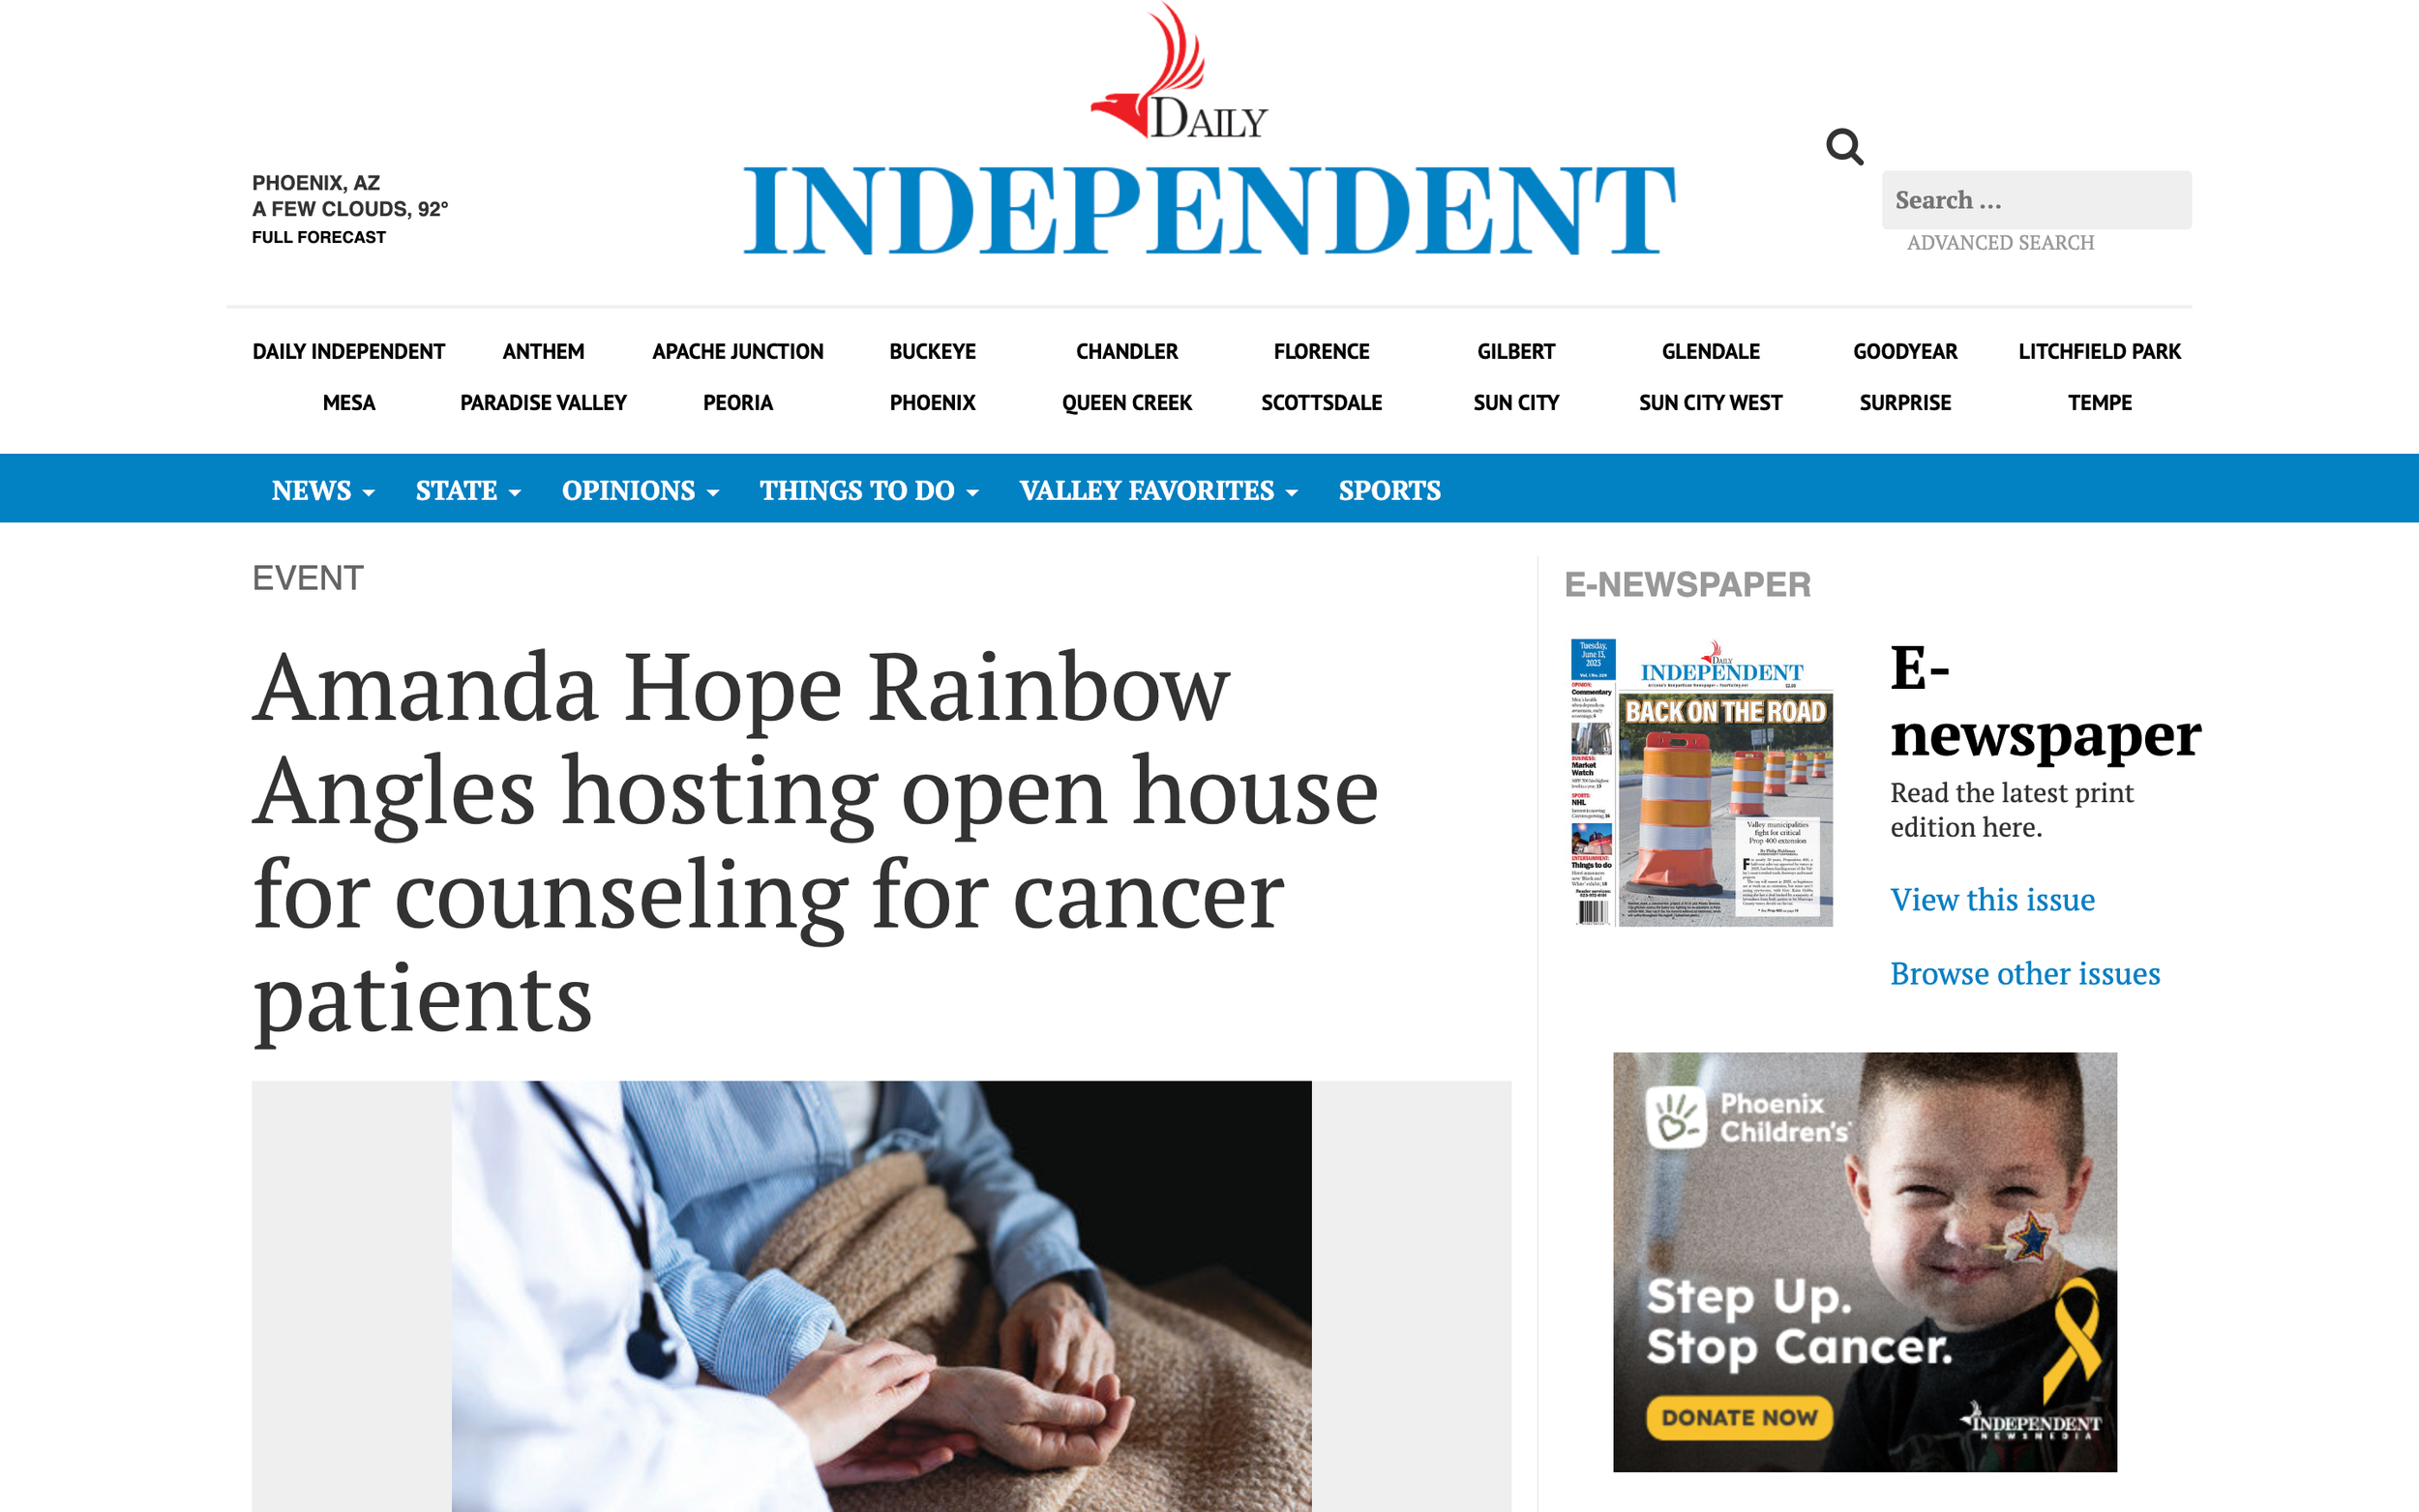 Daily Independent: Amanda Hope Rainbow Angles hosting open house for counseling for cancer patients